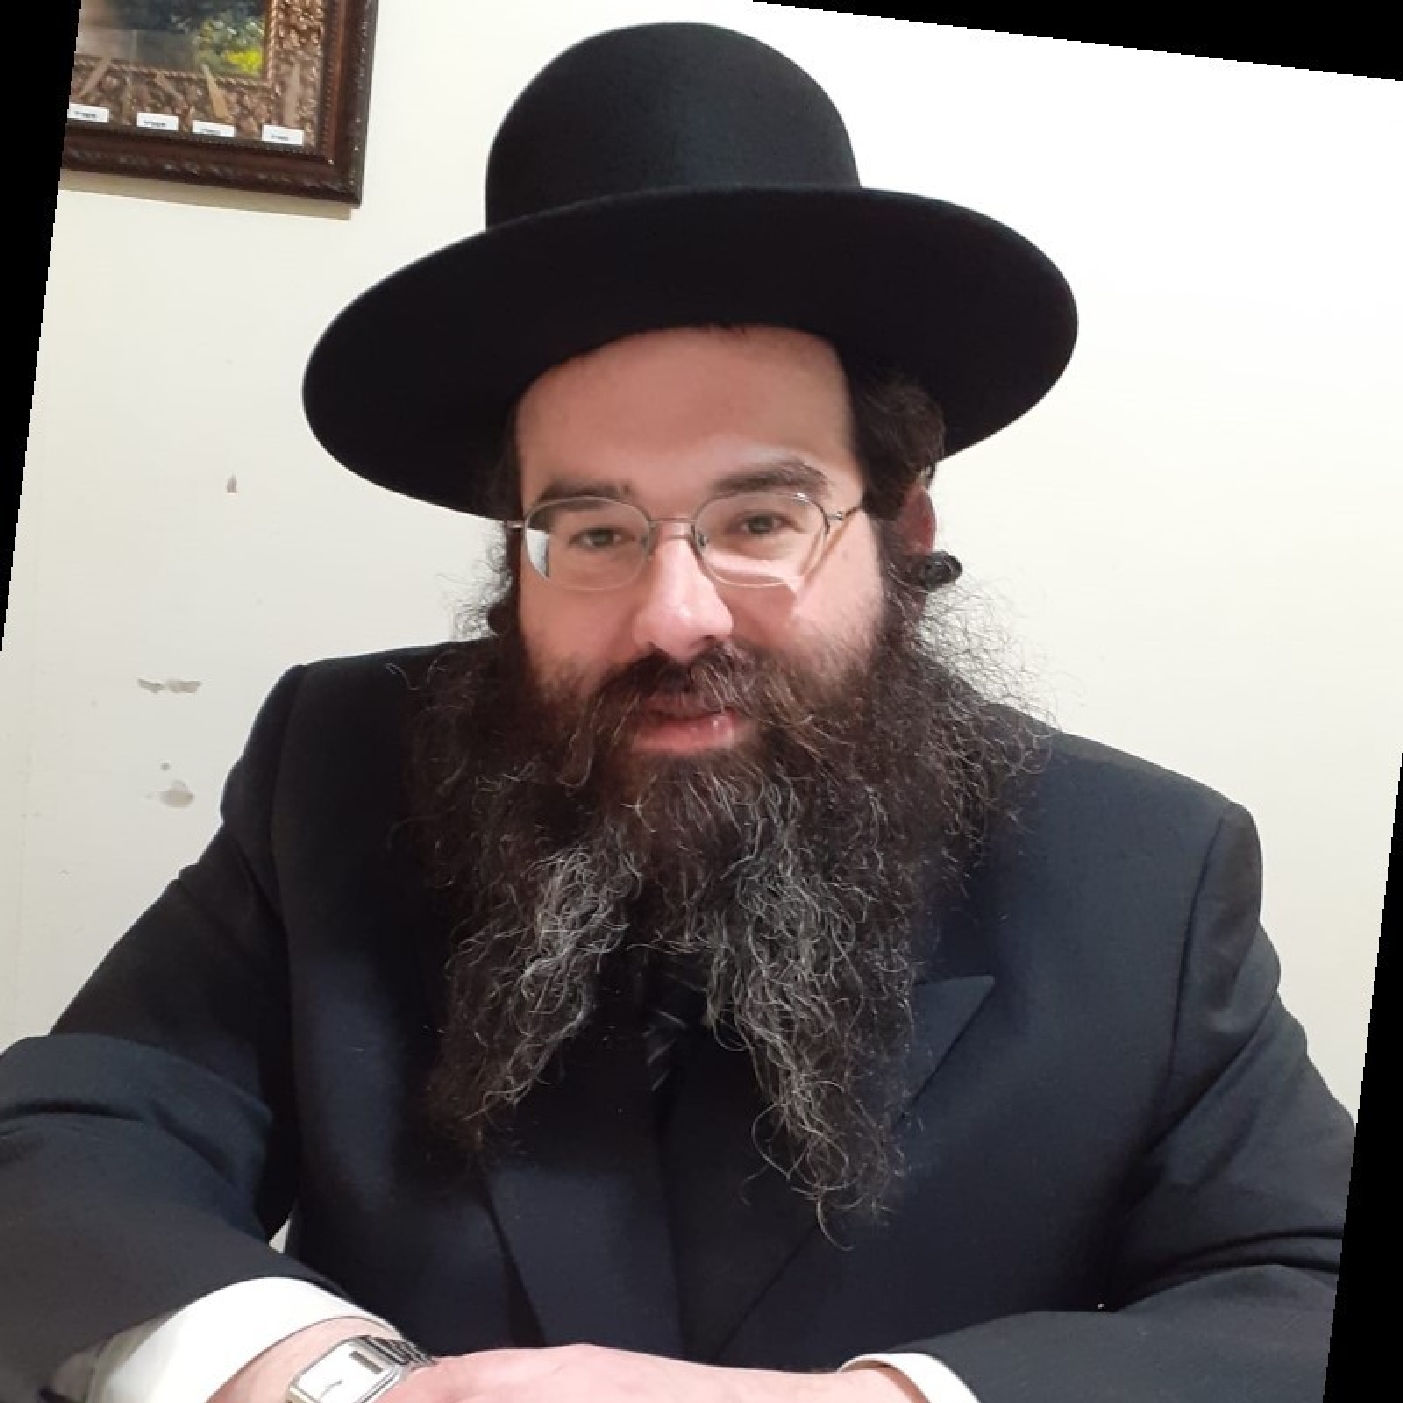 MISHPACHA'S YOCHONON DONN: In this exclusive interview with Yaakov M, Yochonon provides analysis of the governor's race and other elections